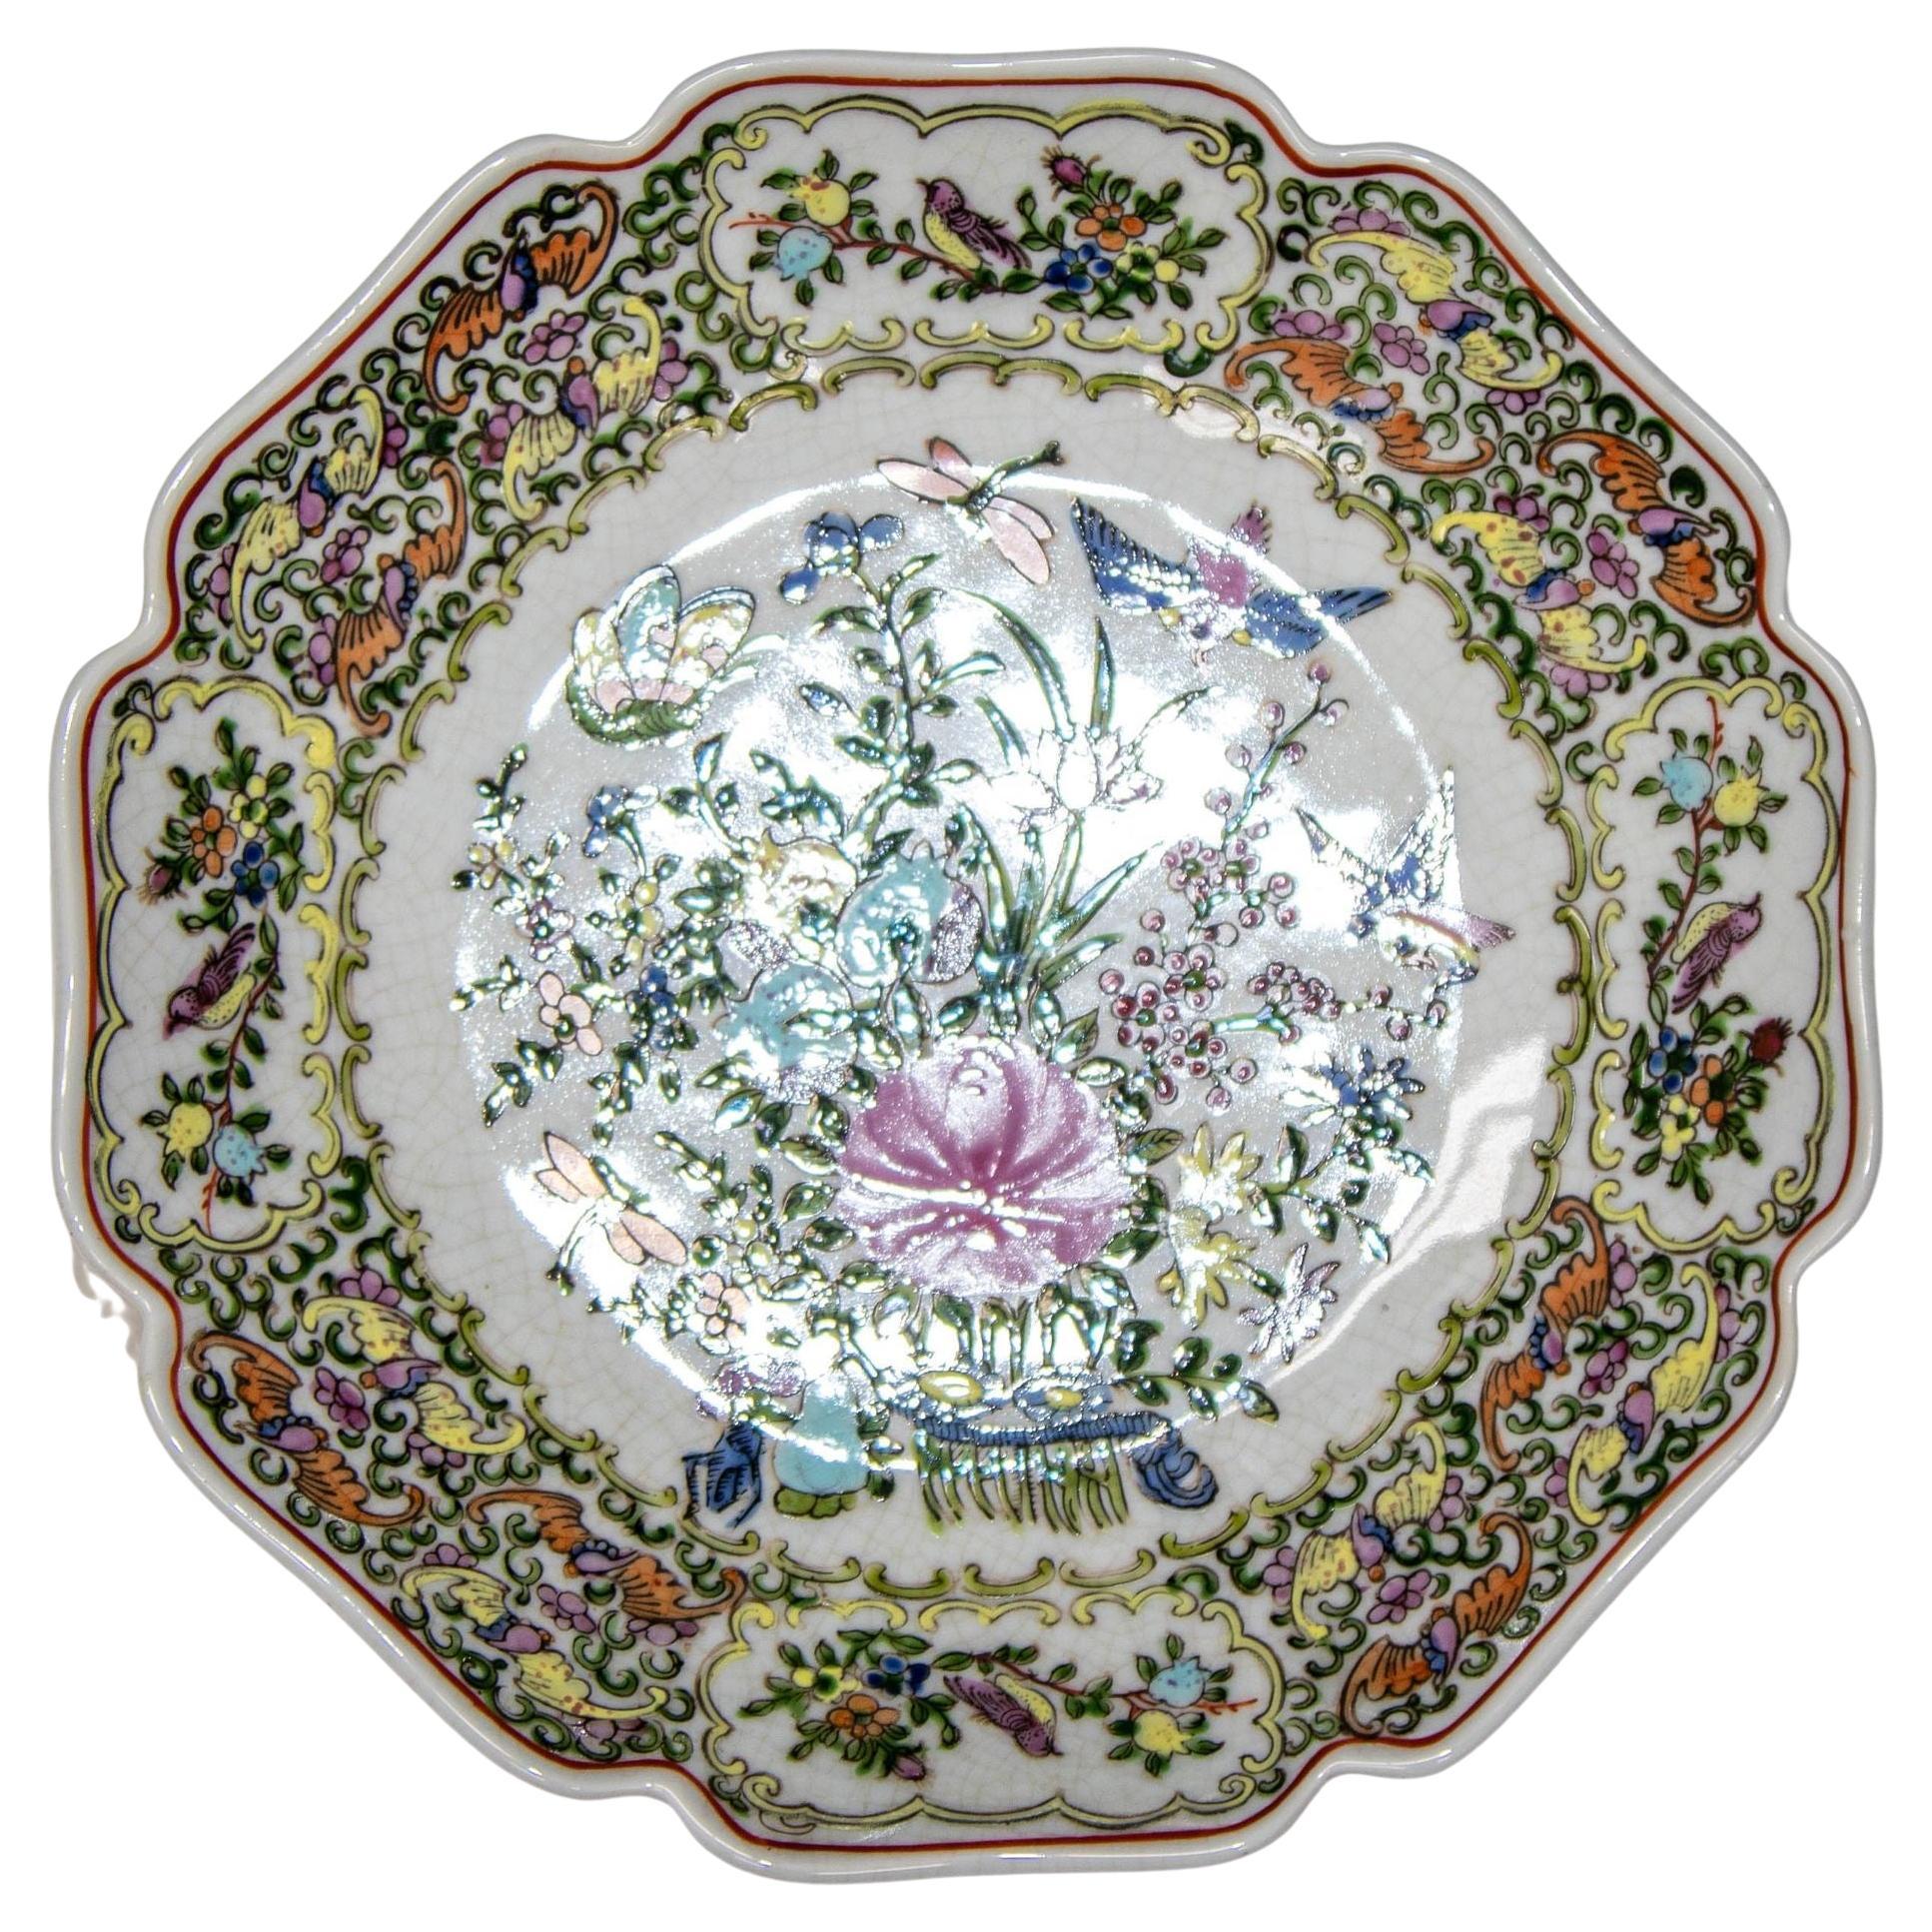 Vintage famille Rose Porcelain plate with birds and flowers hand painted decor